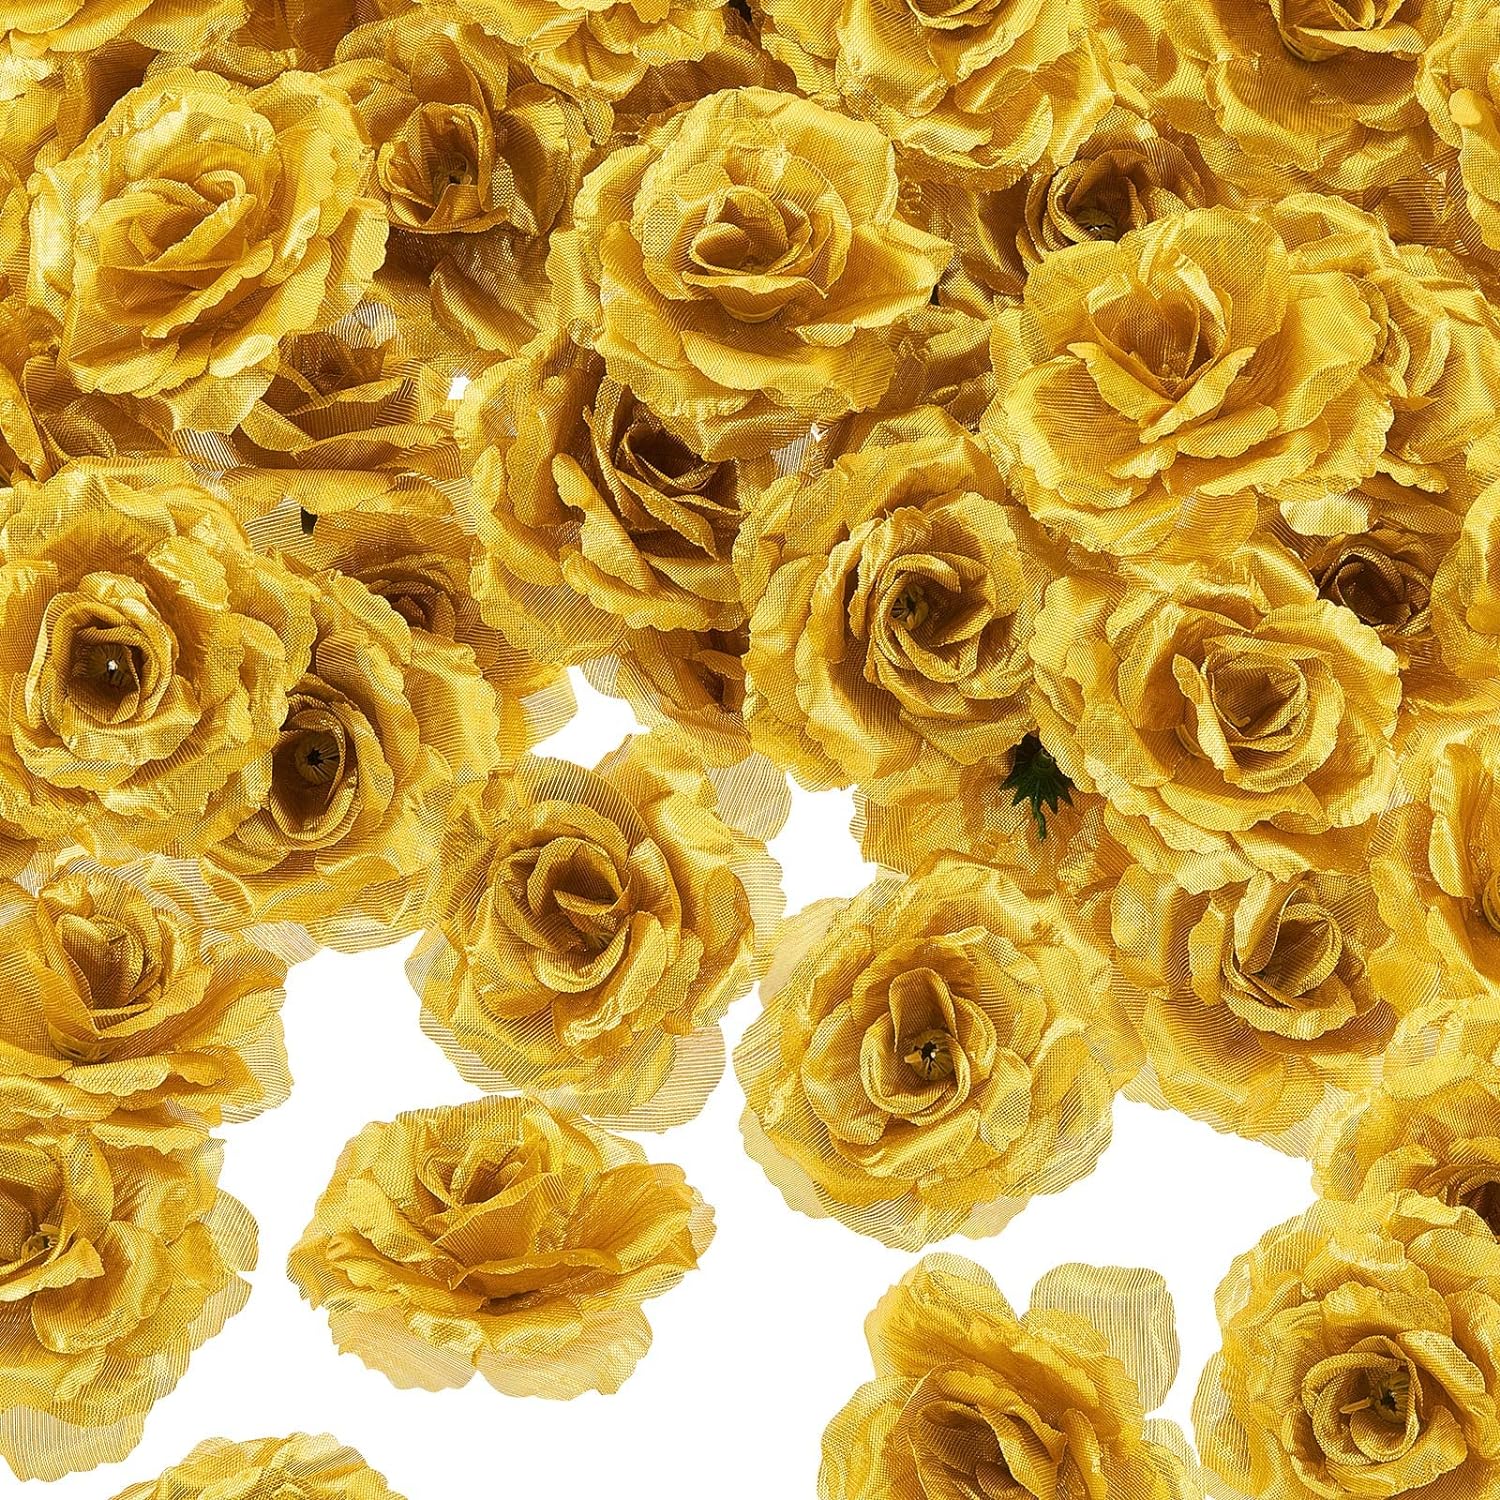 Great Choice Products 100 Pieces Artificial Roses Head Fake Silk Rose 3 Inch Diy Fake Roses Silk Rose Shape Flowers For Valentine Wedding Flower Wa…